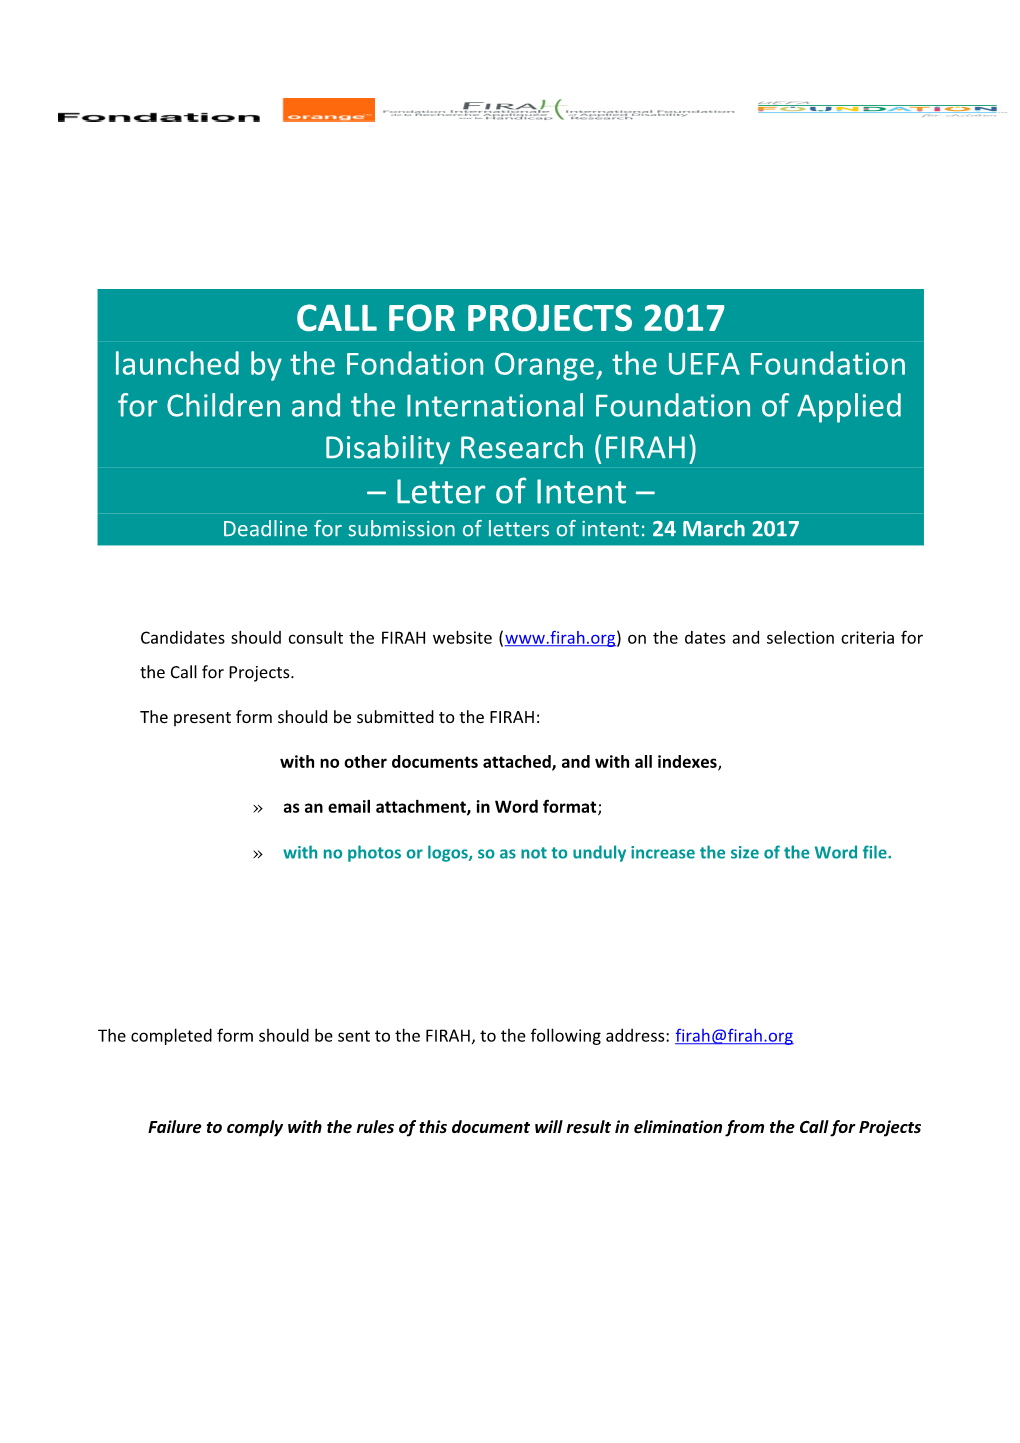 Call for Projects 2017